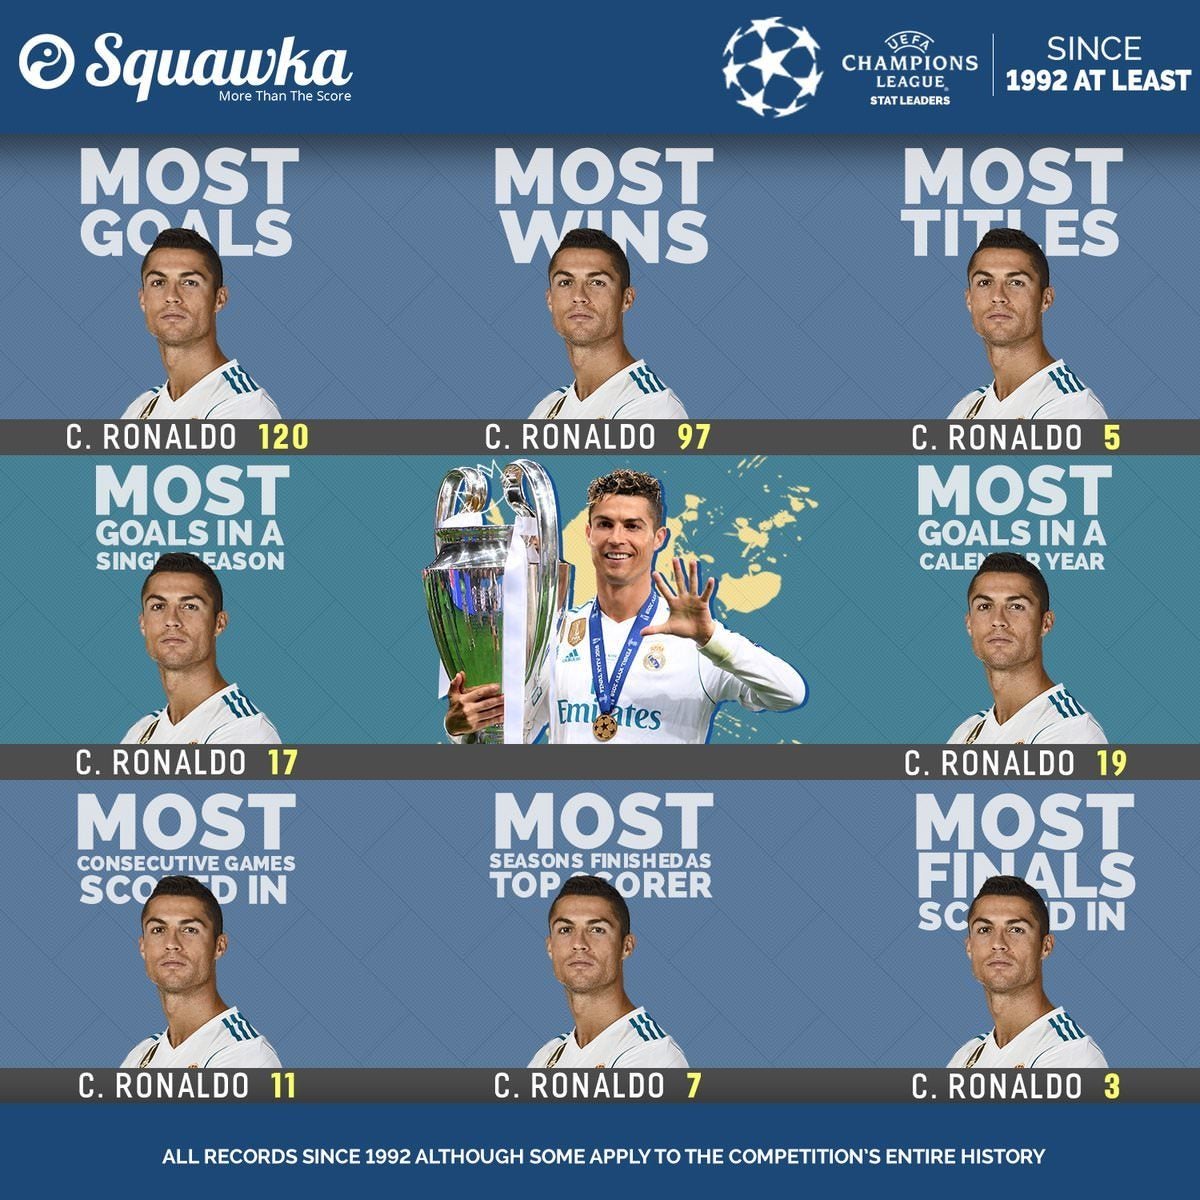 In Champions League which is considered the most elite club competition, he is topscorer and top assist provider. He literally has every record in UCL.